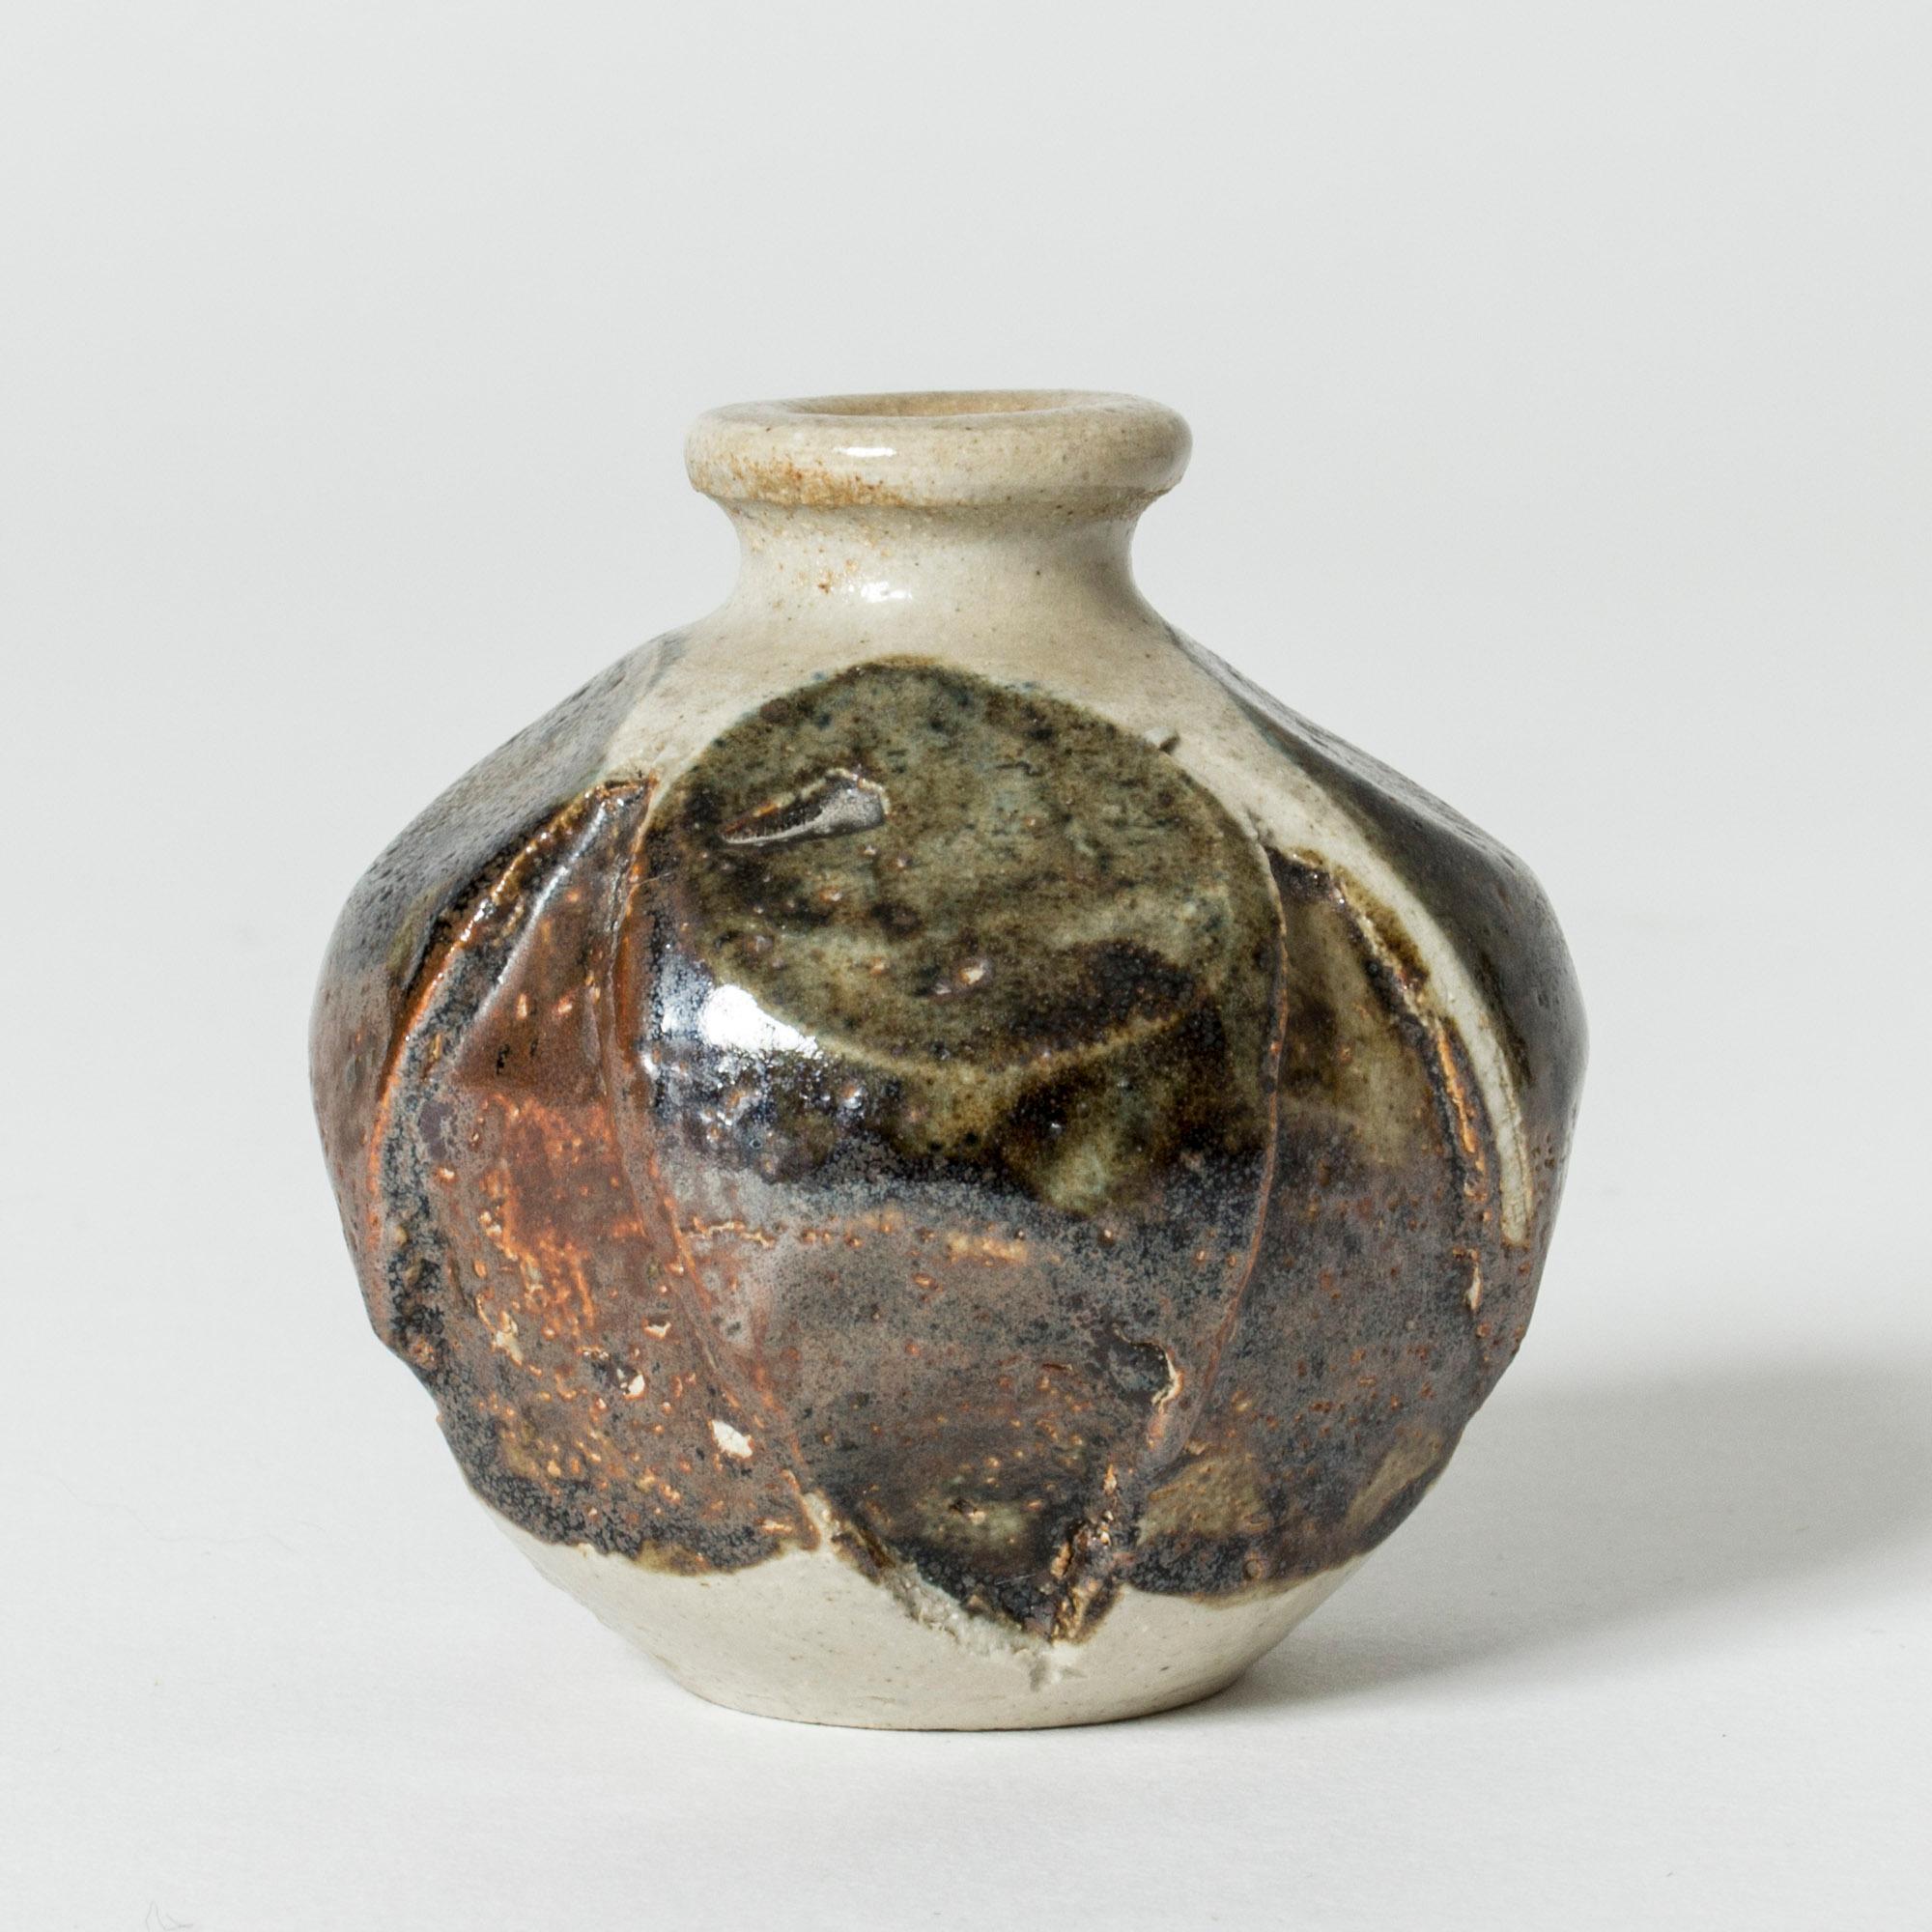 Miniature stoneware vase by Anders B. Liljefors, in a plump form with a structured surface. Partially glazed in rust and brown nuances.

Anders B. Liljefors was a Swedish ceramicist, sculptor and painter. He spent a total of ten years at